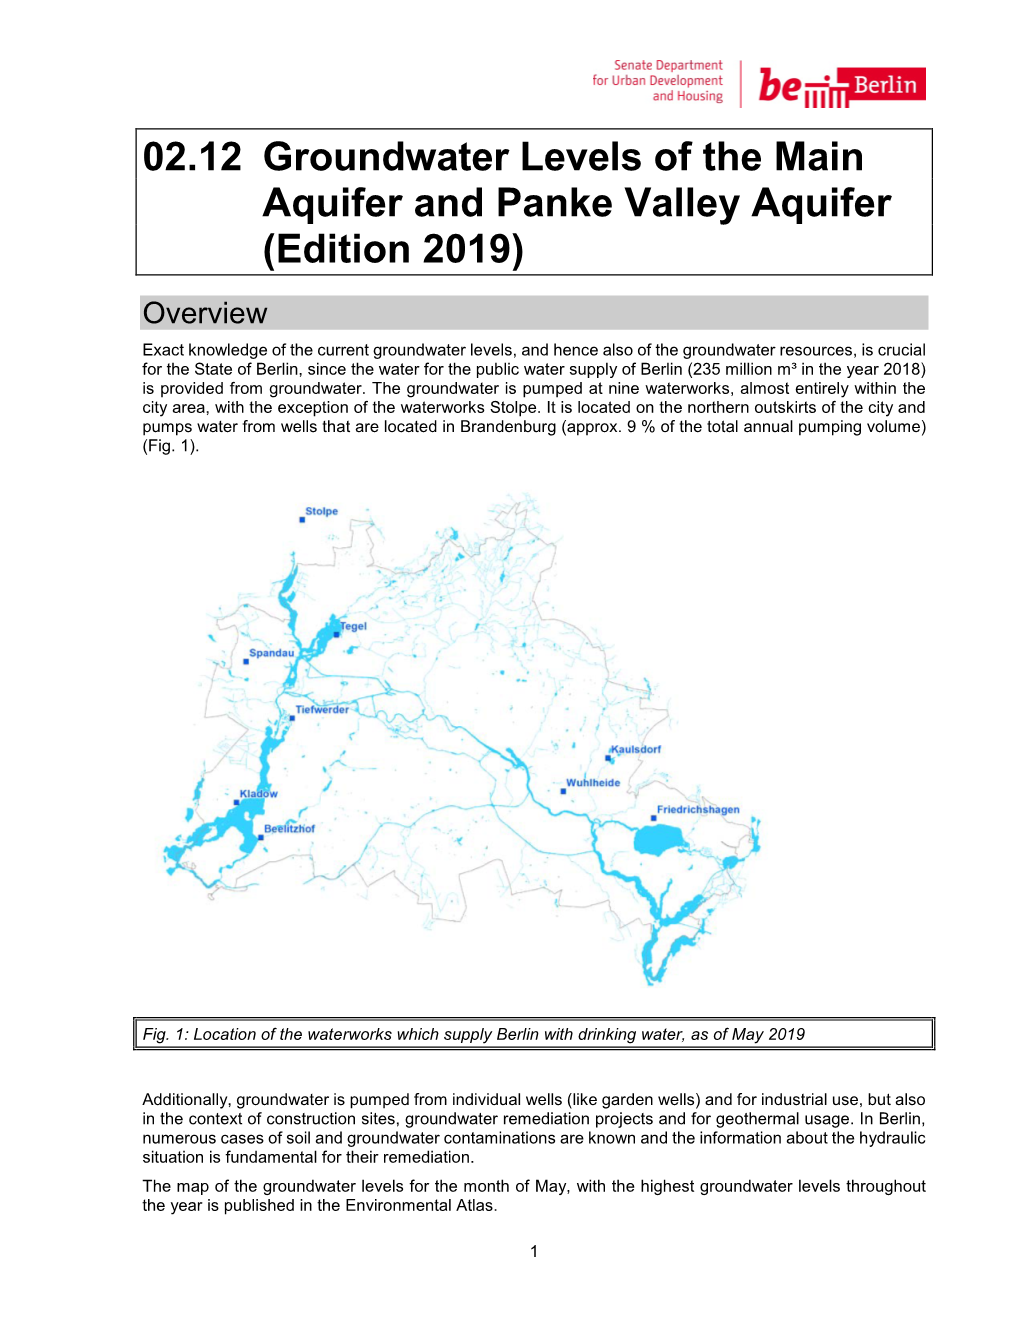 02.12 Groundwater Levels of the Main Aquifer and Panke